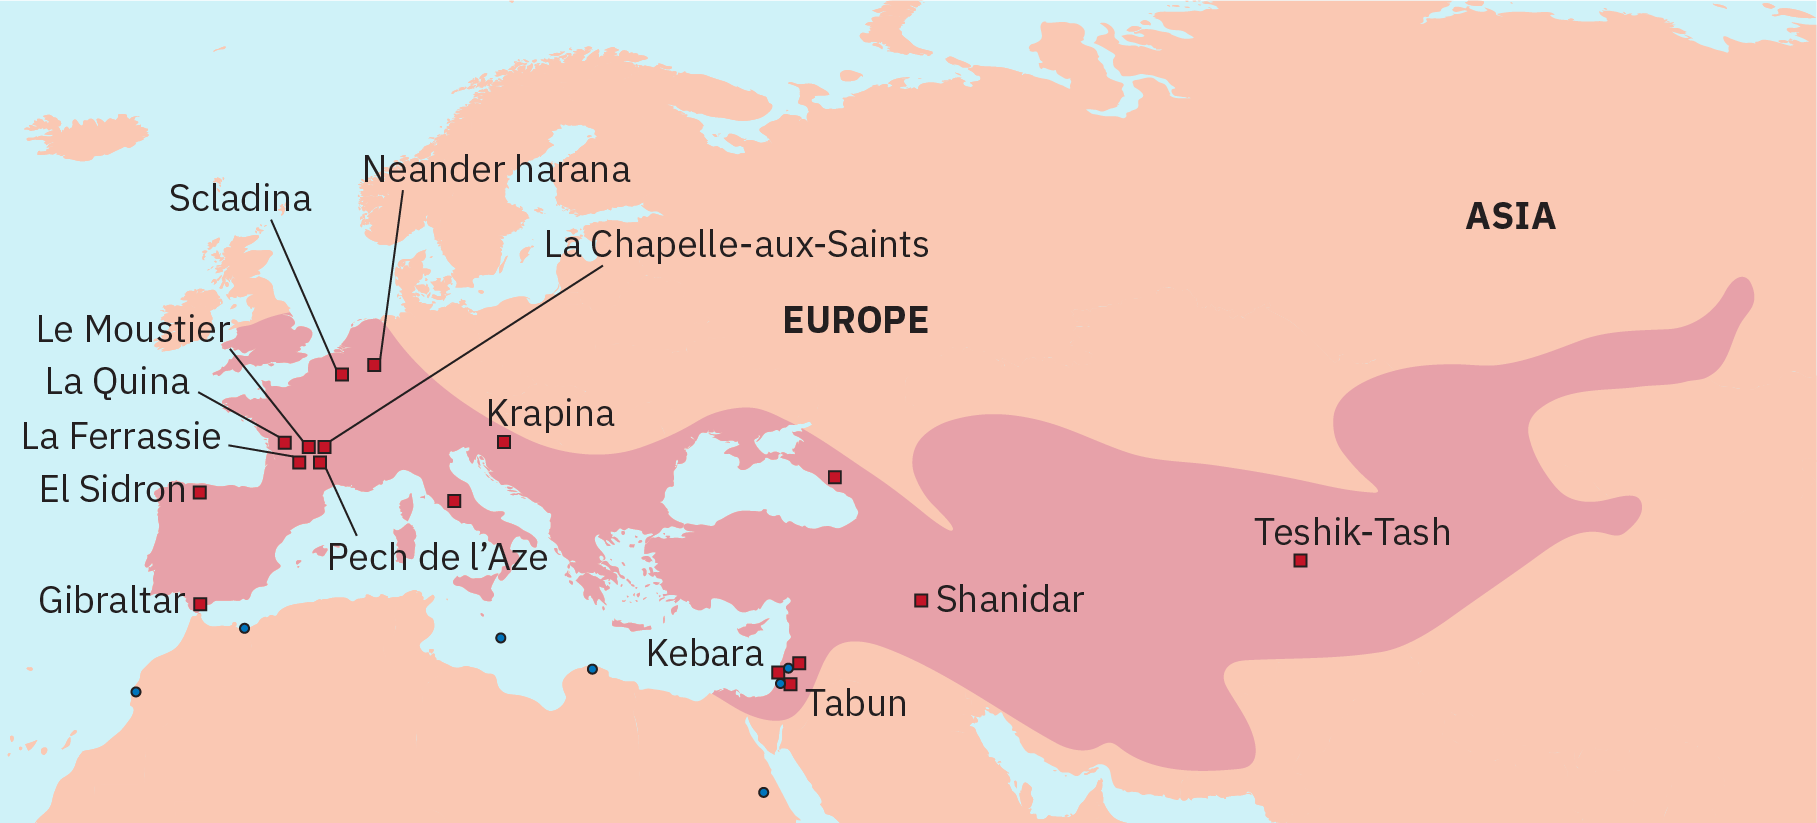 Site locations and territory appear in Europe, the Middle East, and an interior portion of Asia.